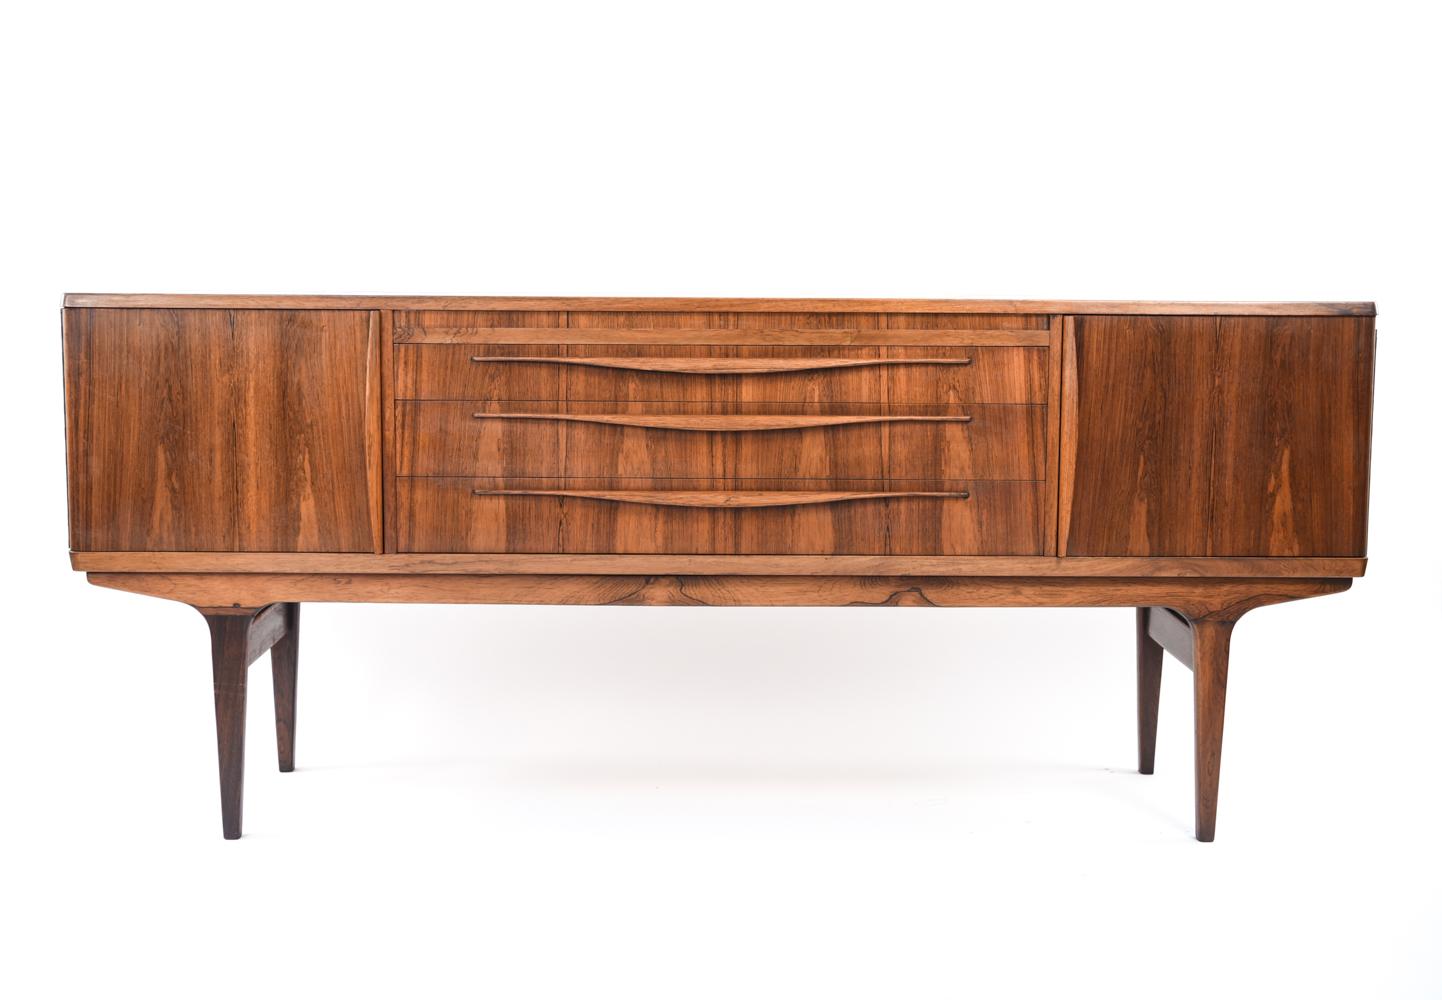 This piece is a Classic example of Danish midcentury design. Three central drawers are flanked by cabinets, providing ample storage. The rich color of the rosewood elevates this piece to the highest of standards.